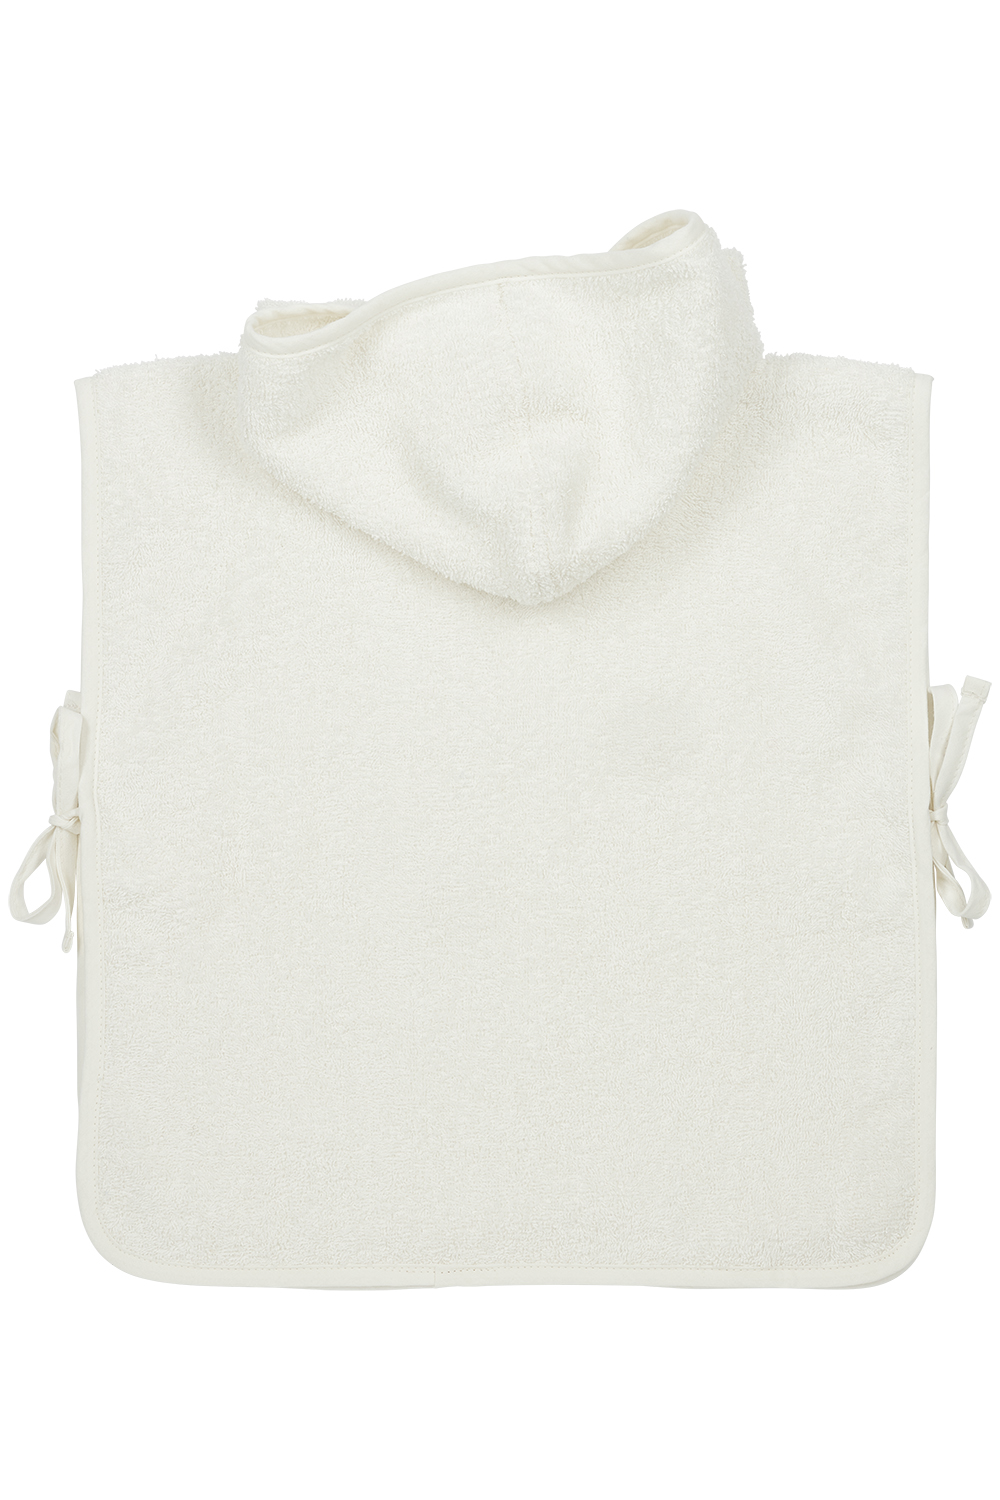 Badeponcho frottee Uni - offwhite - 1-3 Jahre